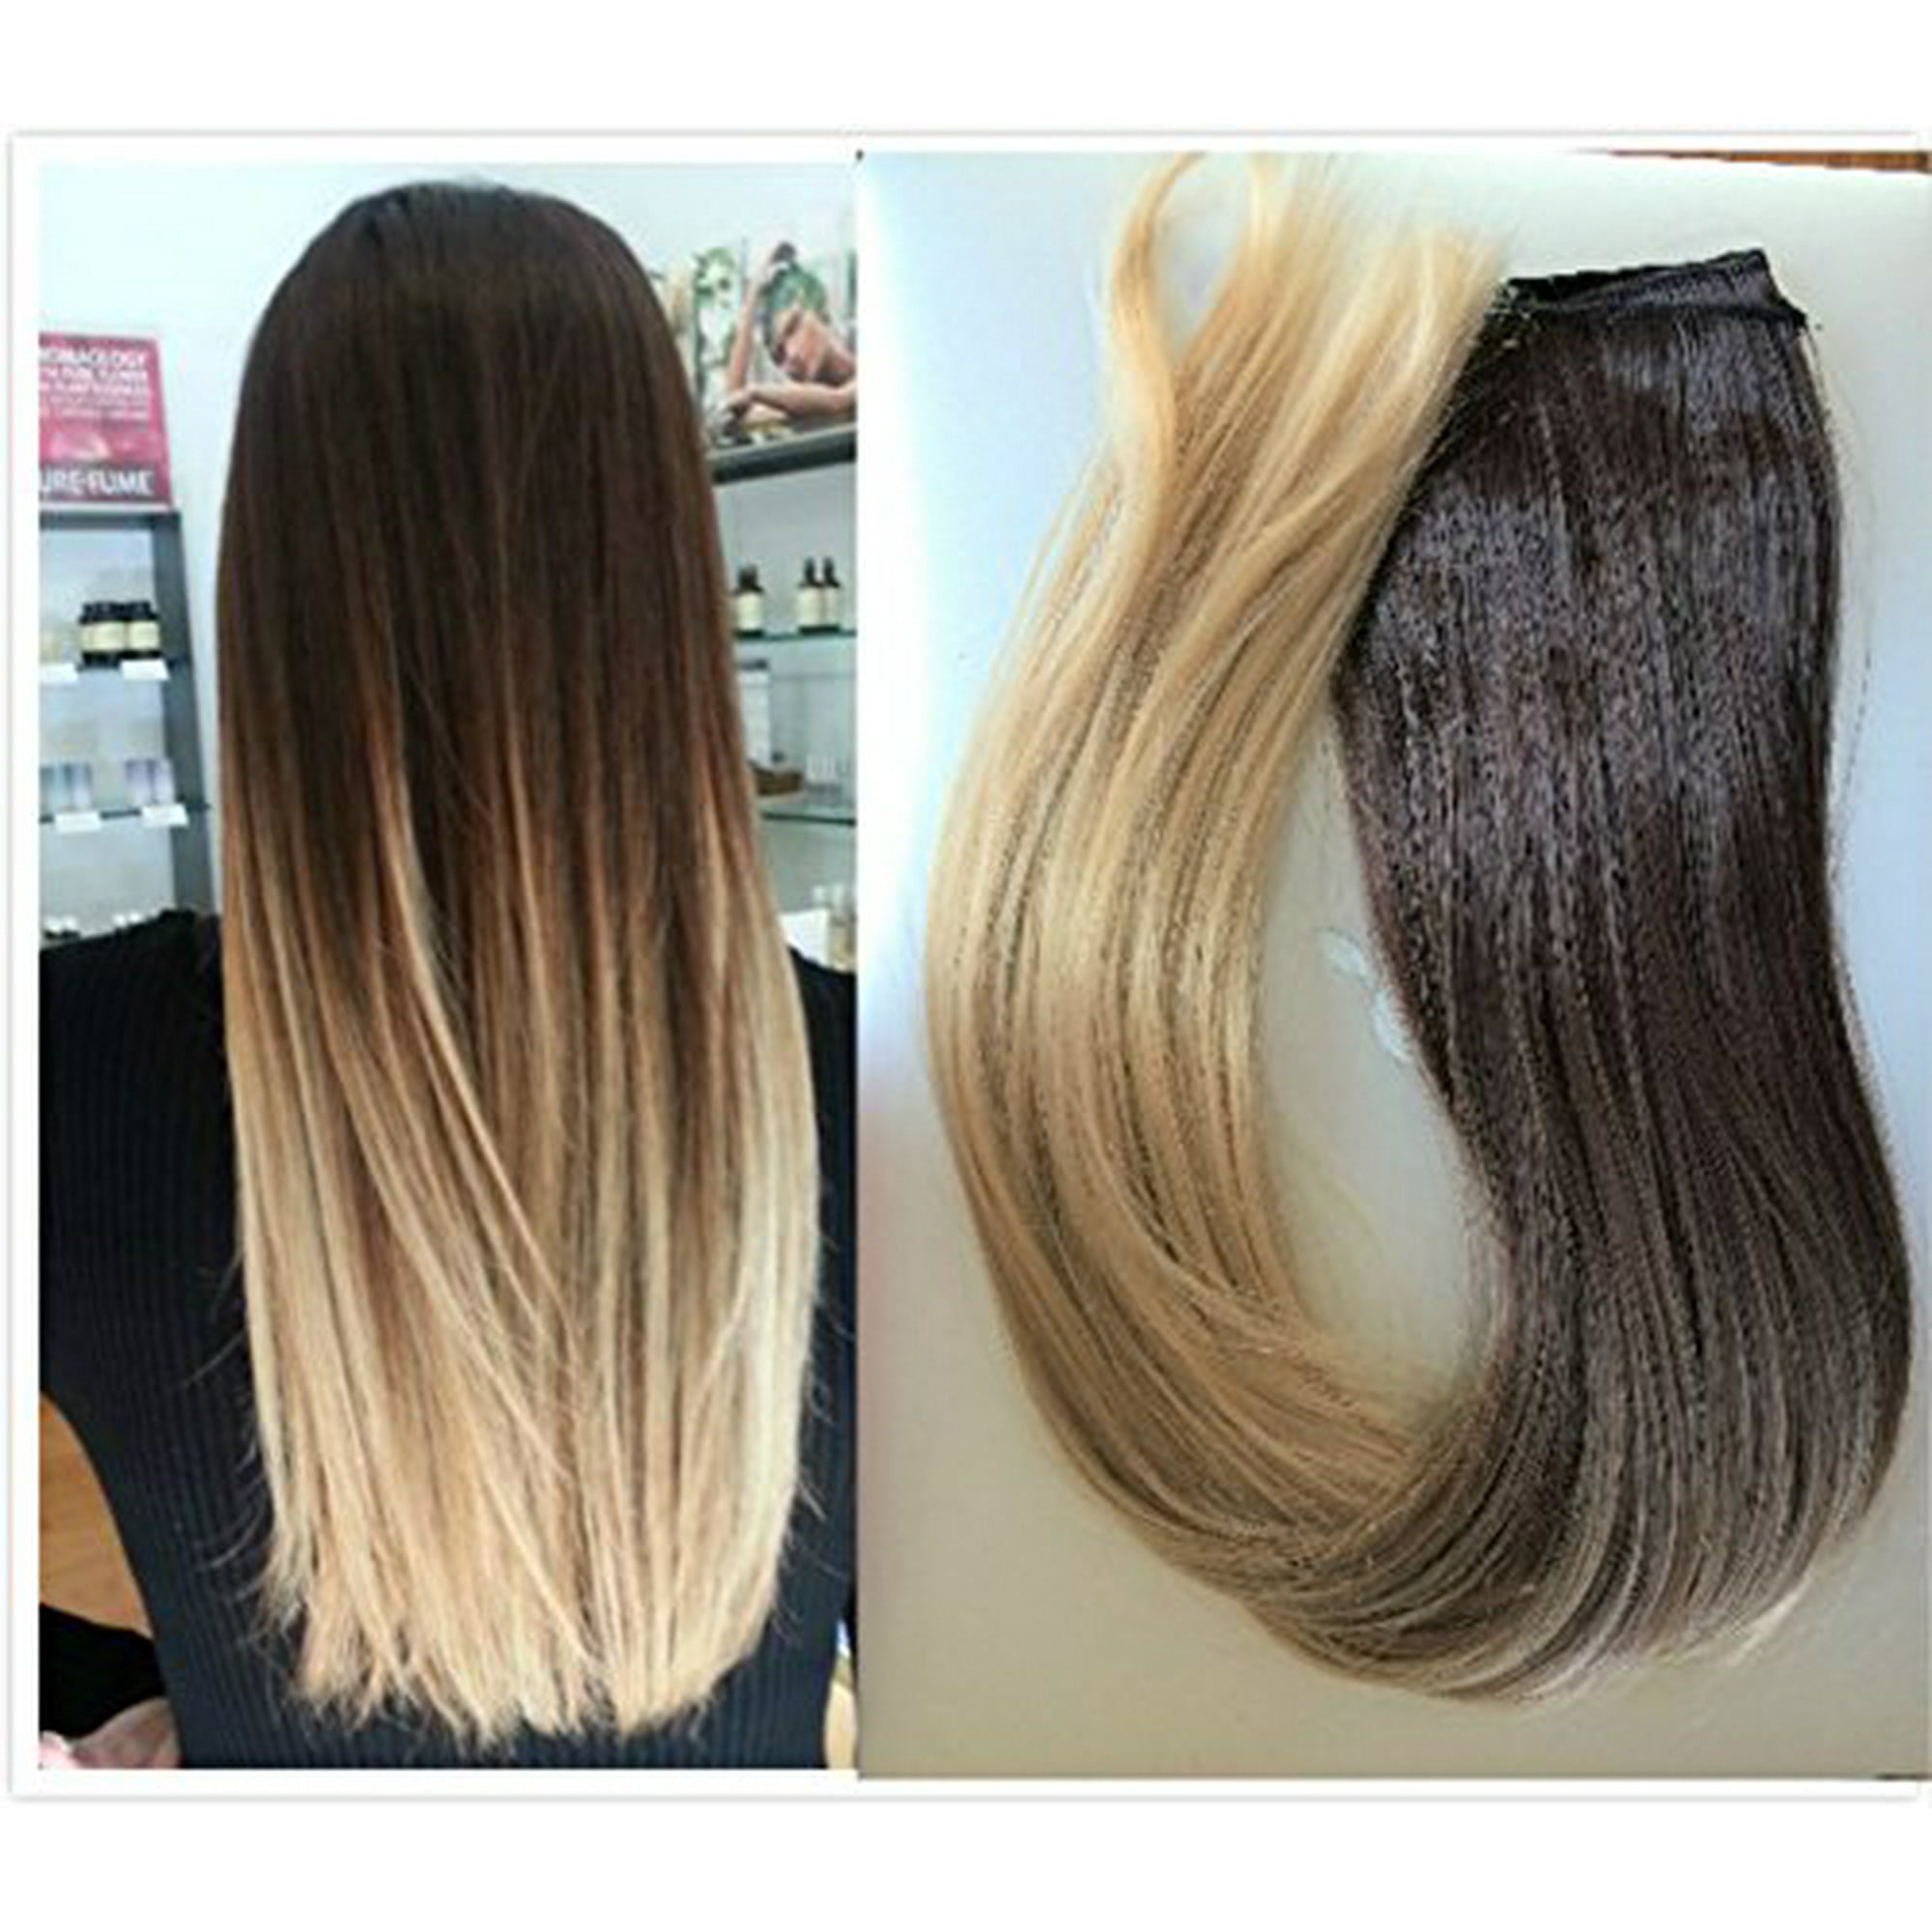 22 Inches 3 4 Head One Piece Ombre Dip Dyed Straight Clip In Hair Extensions Dark Brown To Sandy Blonde Dl Walmart Canada